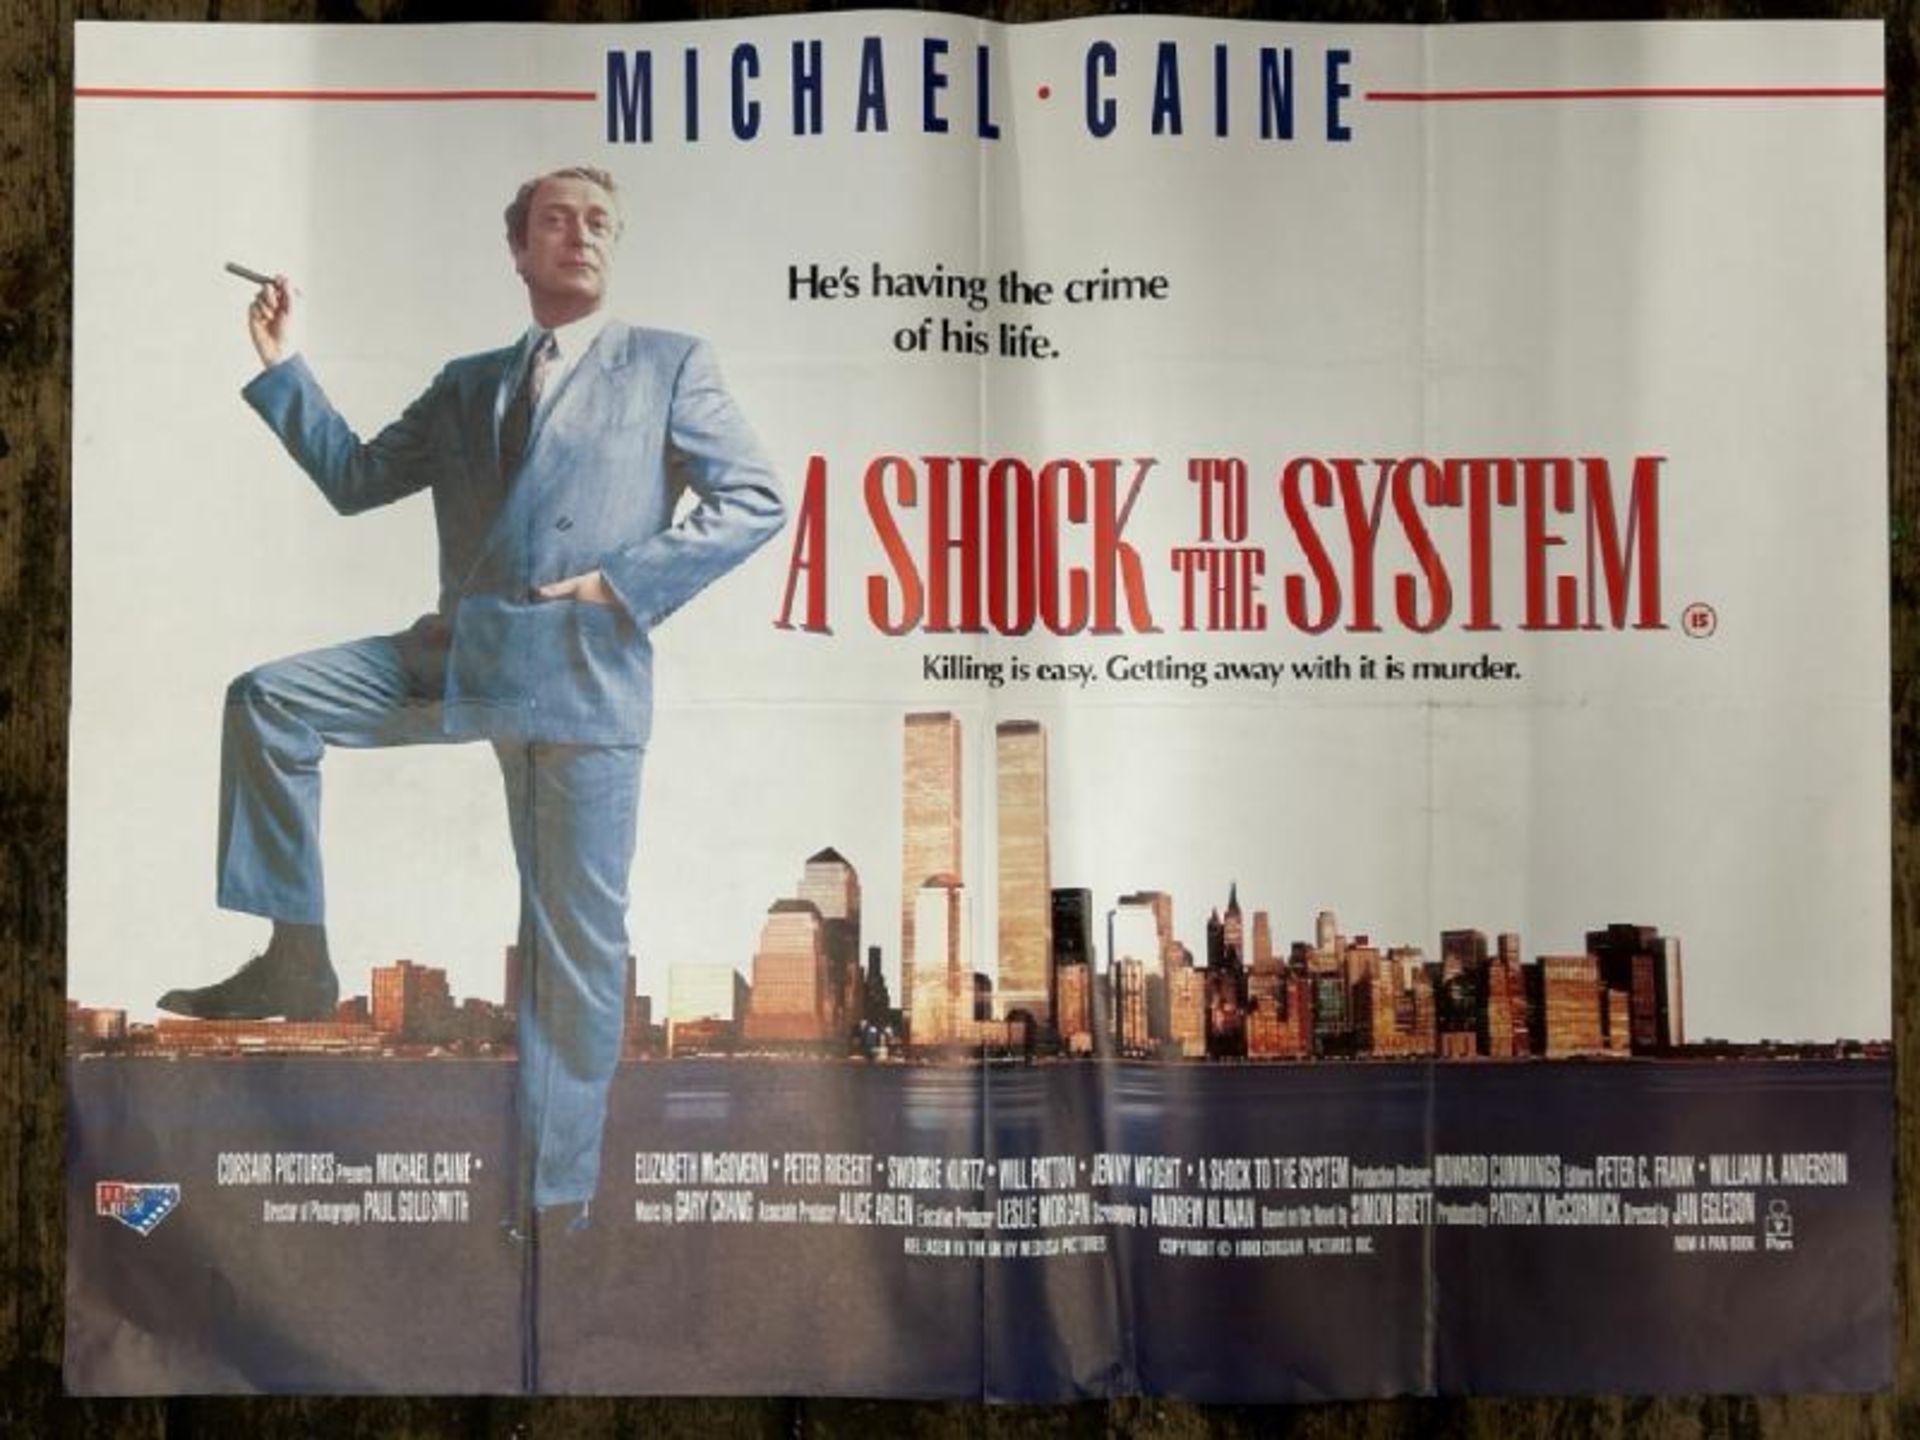 A SHOCK TO THE SYSTEM STARRING MICHAEL CAINE, ORIGINAL FILM POSTER, 101CM W X 76CM H